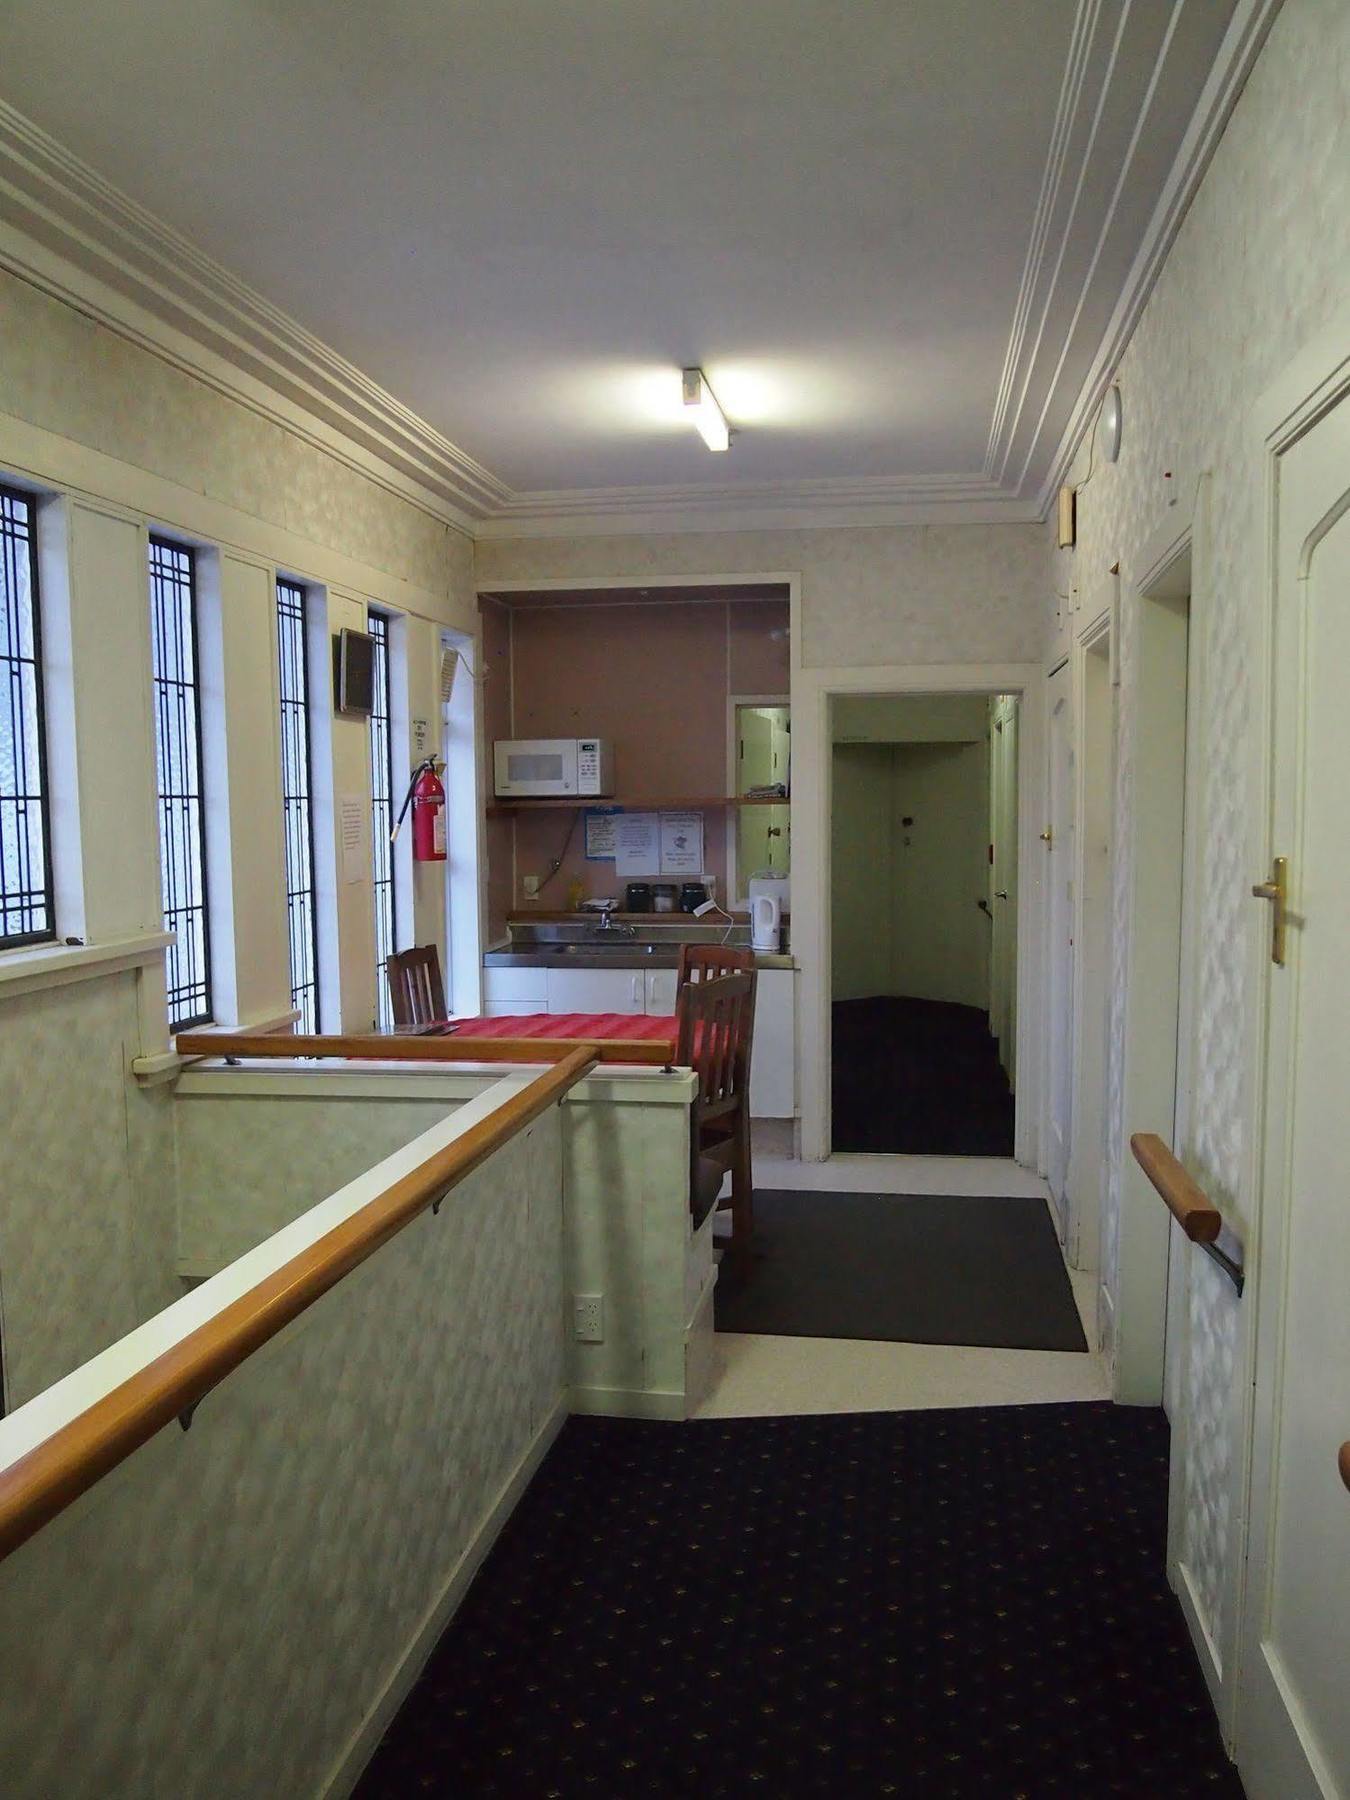 Kiwis Nest Backpackers And Budget Accommodation Dunedin Extérieur photo